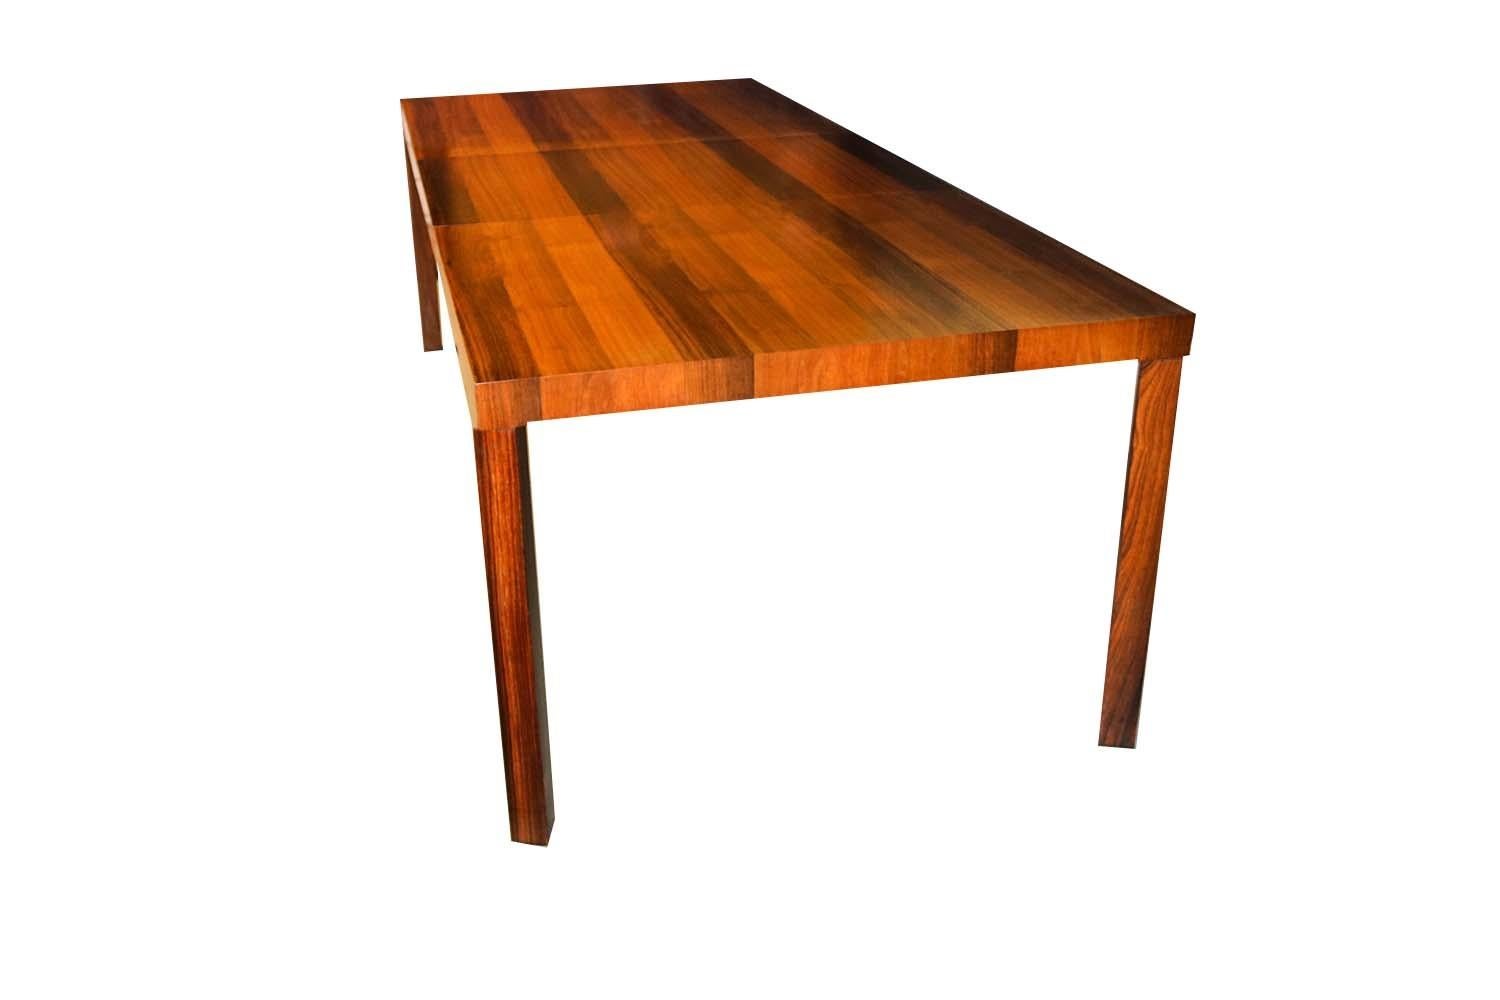 A spectacular tri-wood midcentury Parsons dining table by Dyrlund of Denmark, circa 1960. This beautiful vintage Parsons table by Dyrlund features alternating veneers of rosewood, teak and walnut over four solid rosewood legs and includes one leaf.